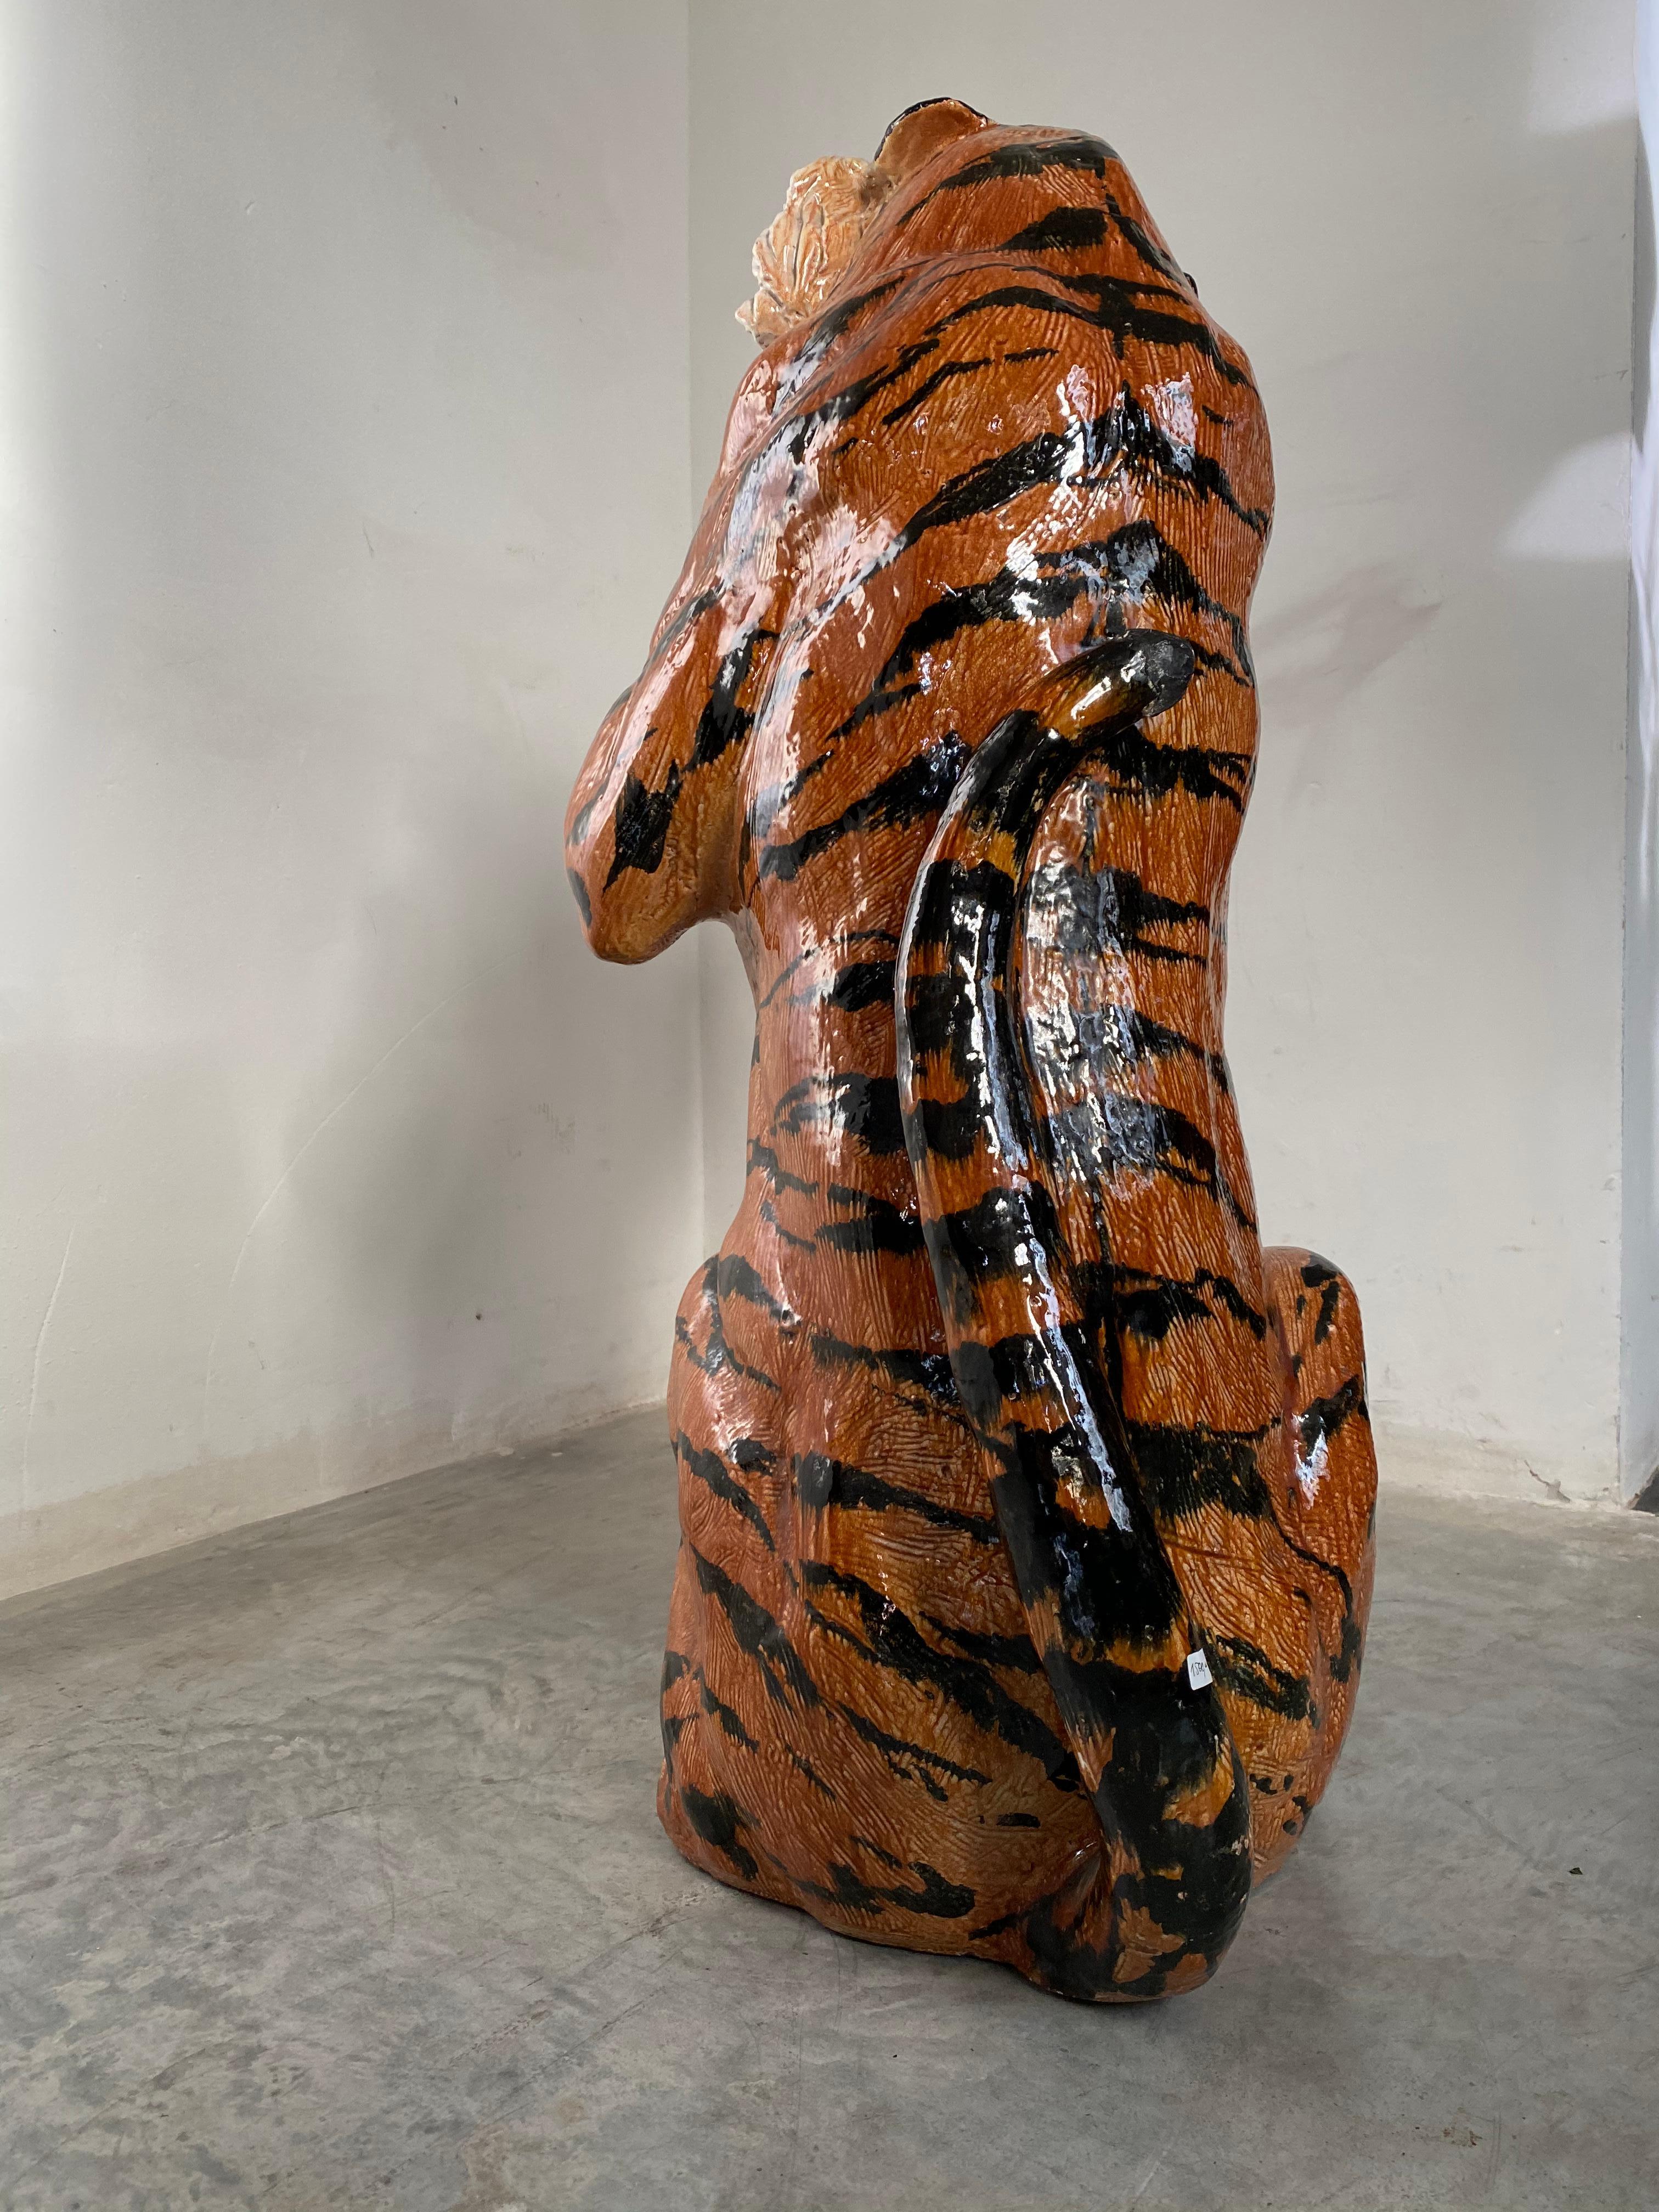 The stunning expression of a large and vibrant earthenware sculpture of a tiger, painted and glazed in white and orange-red with black markings, sitting snarling and resplendent with his teeth bared.
Made in Italy, circa 1970s. Hand executed by a